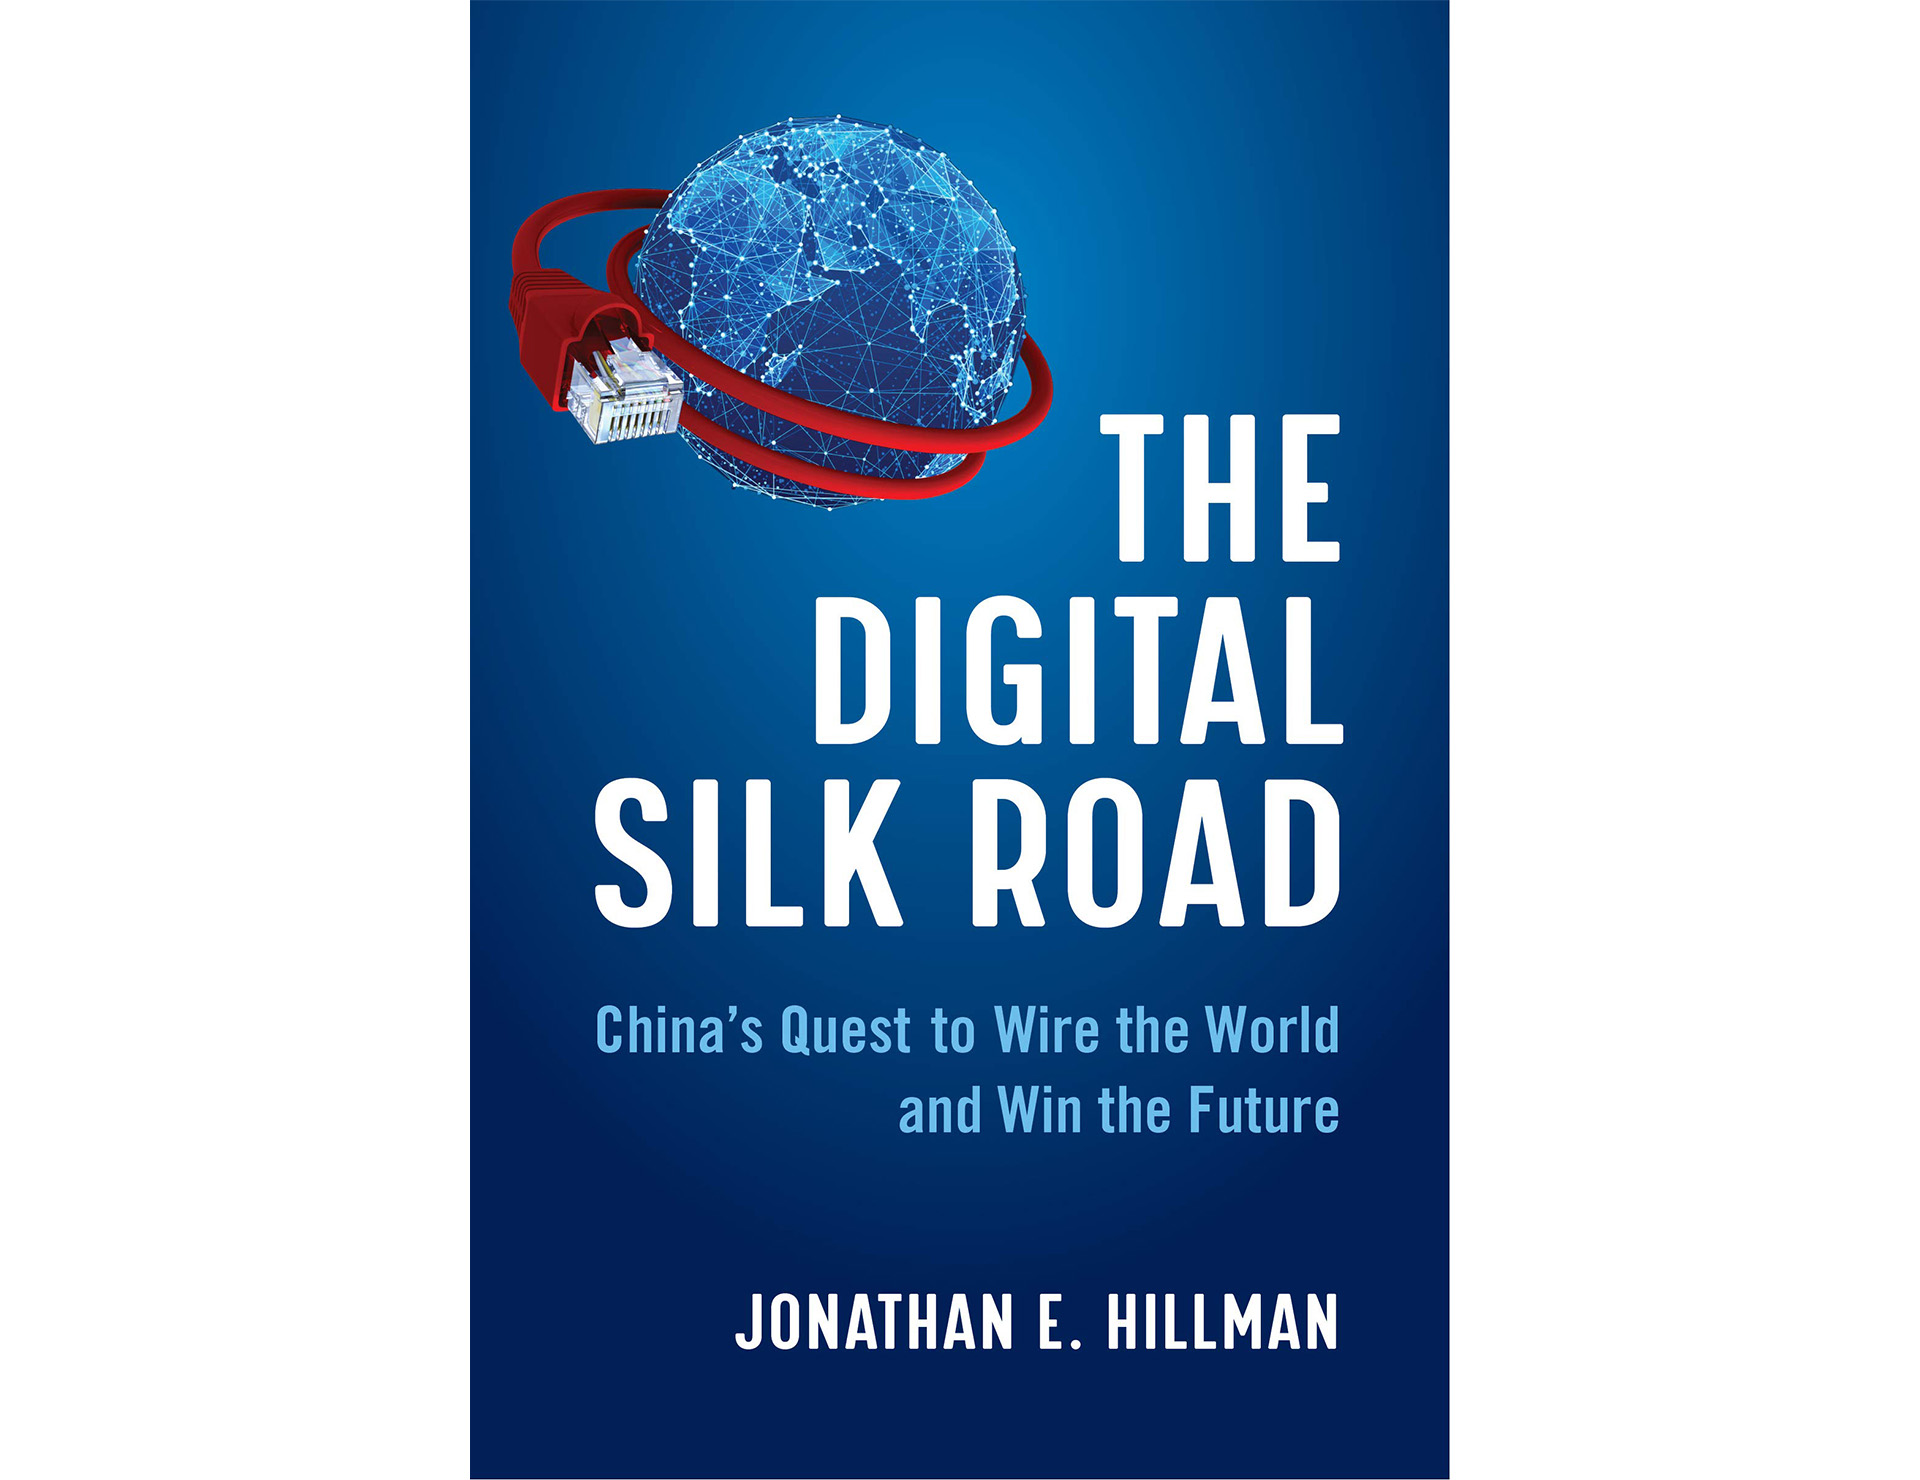 The Digital Silk Road: China’s Quest to Wire the World and Win the Future